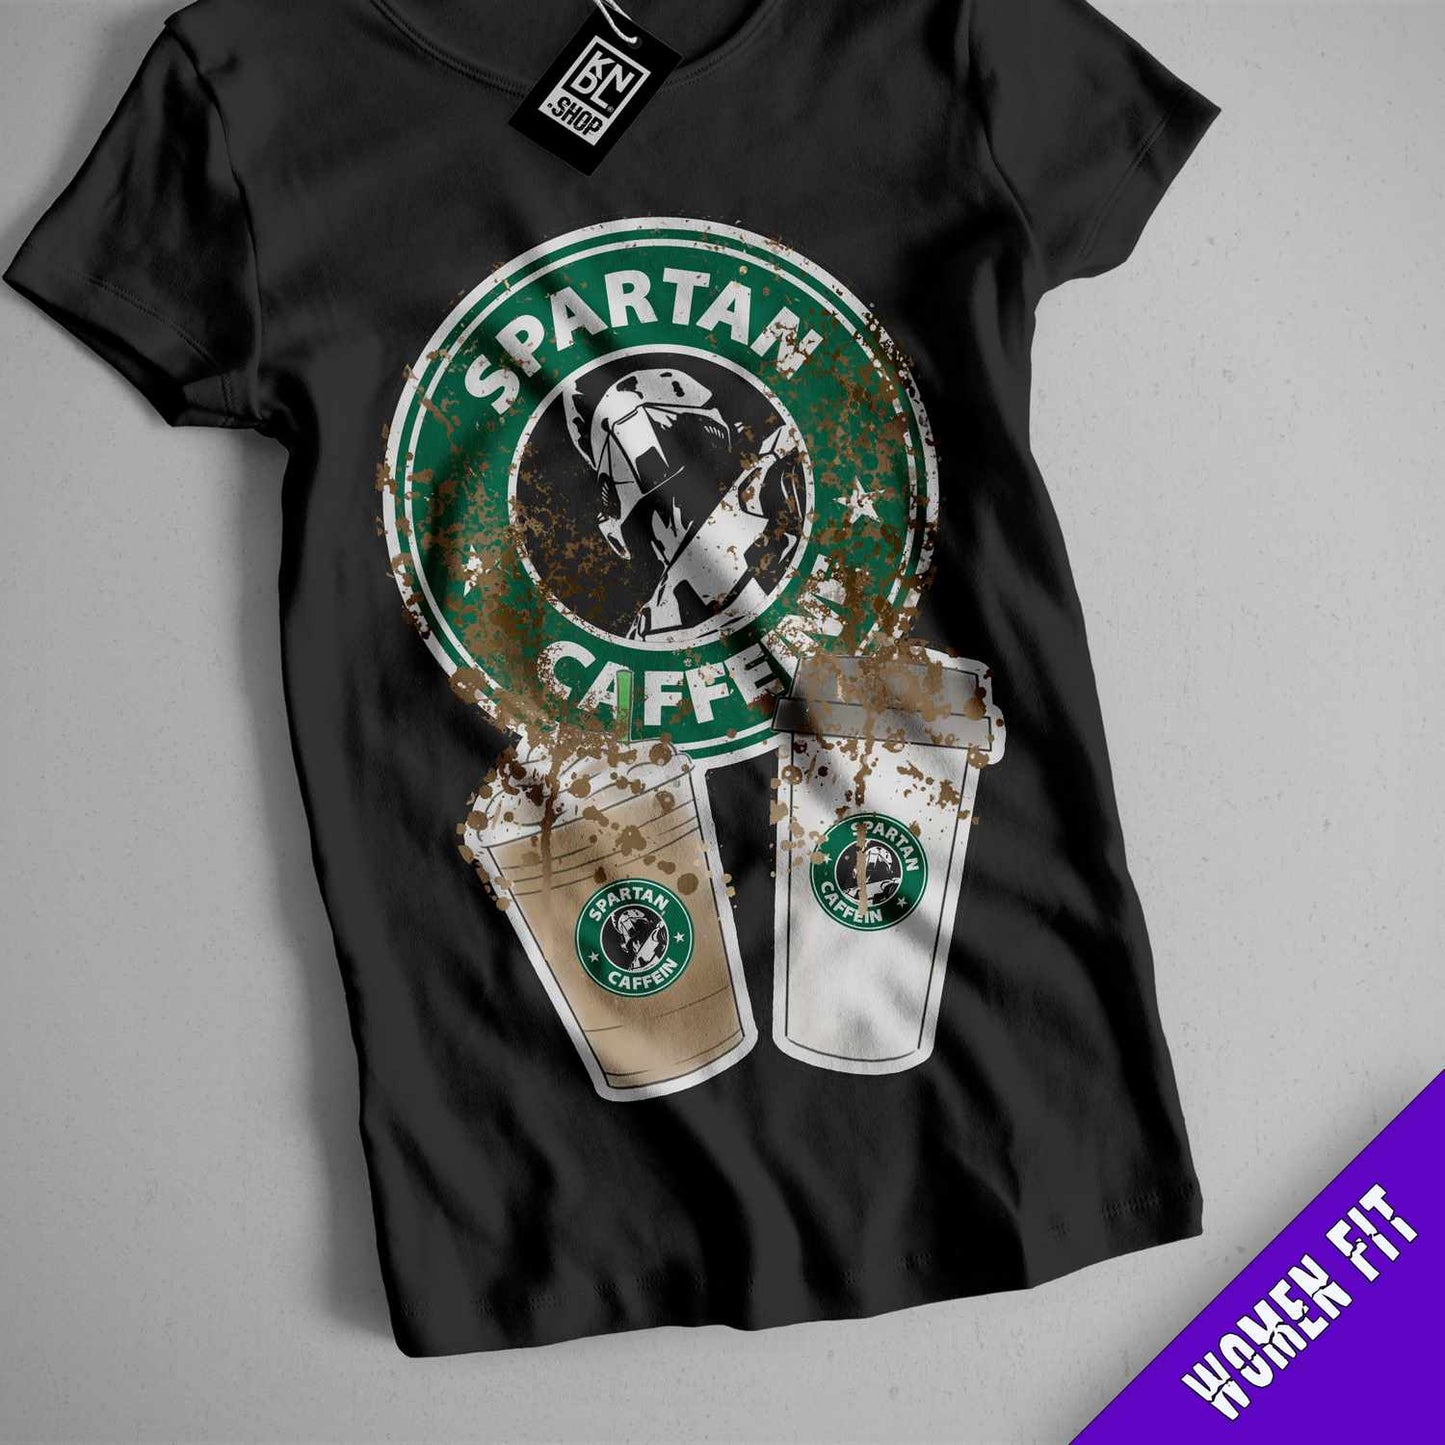 a t - shirt with the starbucks logo on it